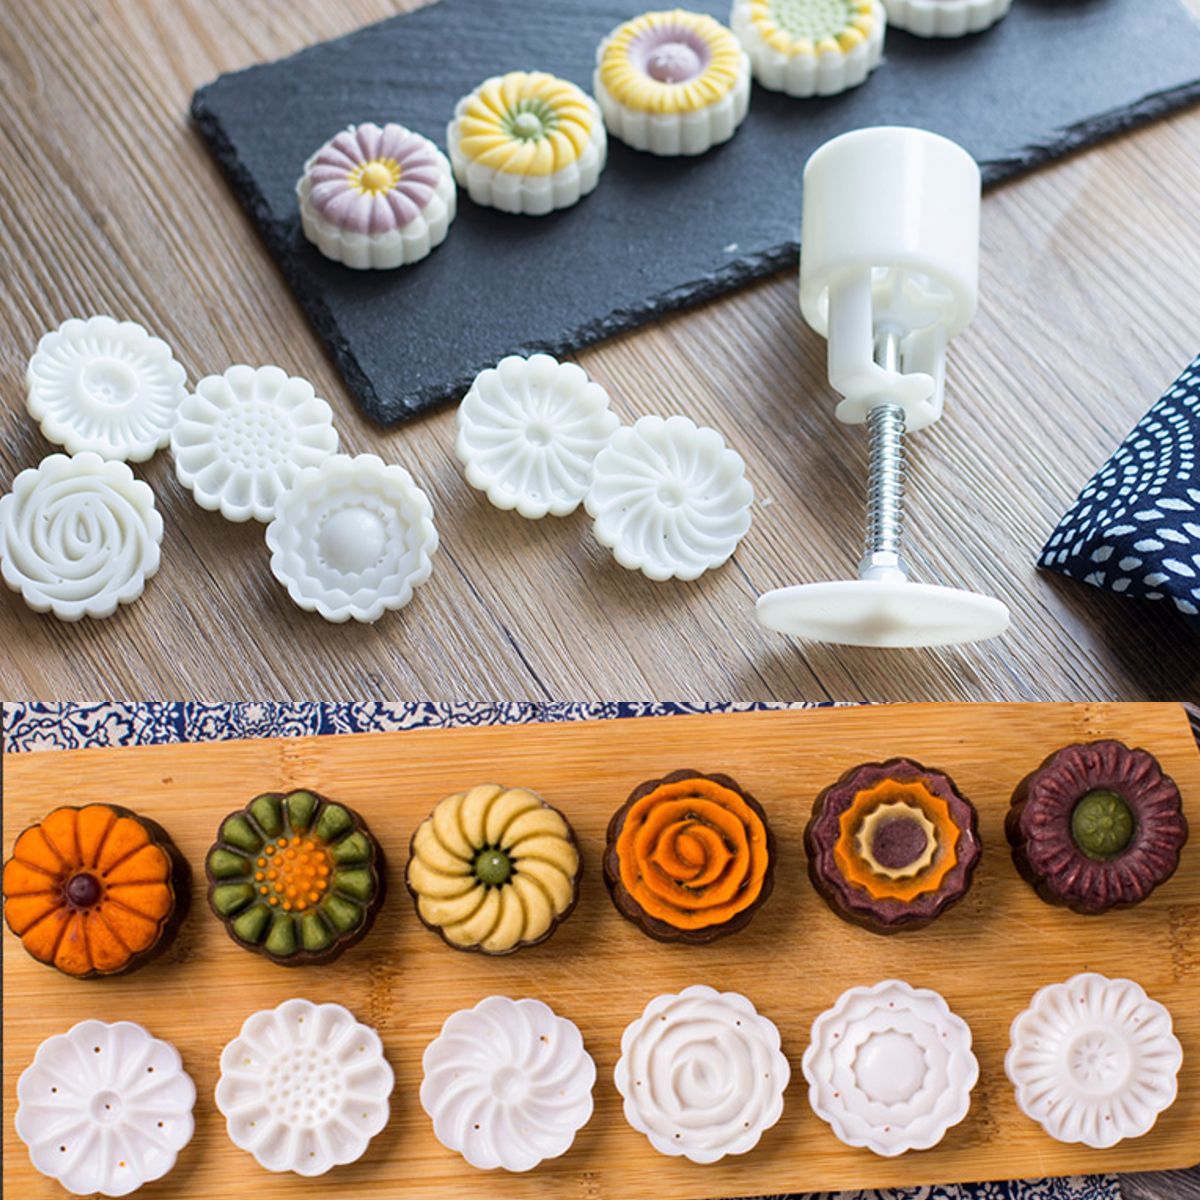 Round-Mooncake-Pastry-Mold-50g-Hand-Press-Mould-Flower-Pattern-Festival-Decor-DIY-Decor-w-6-Stamps-1339042